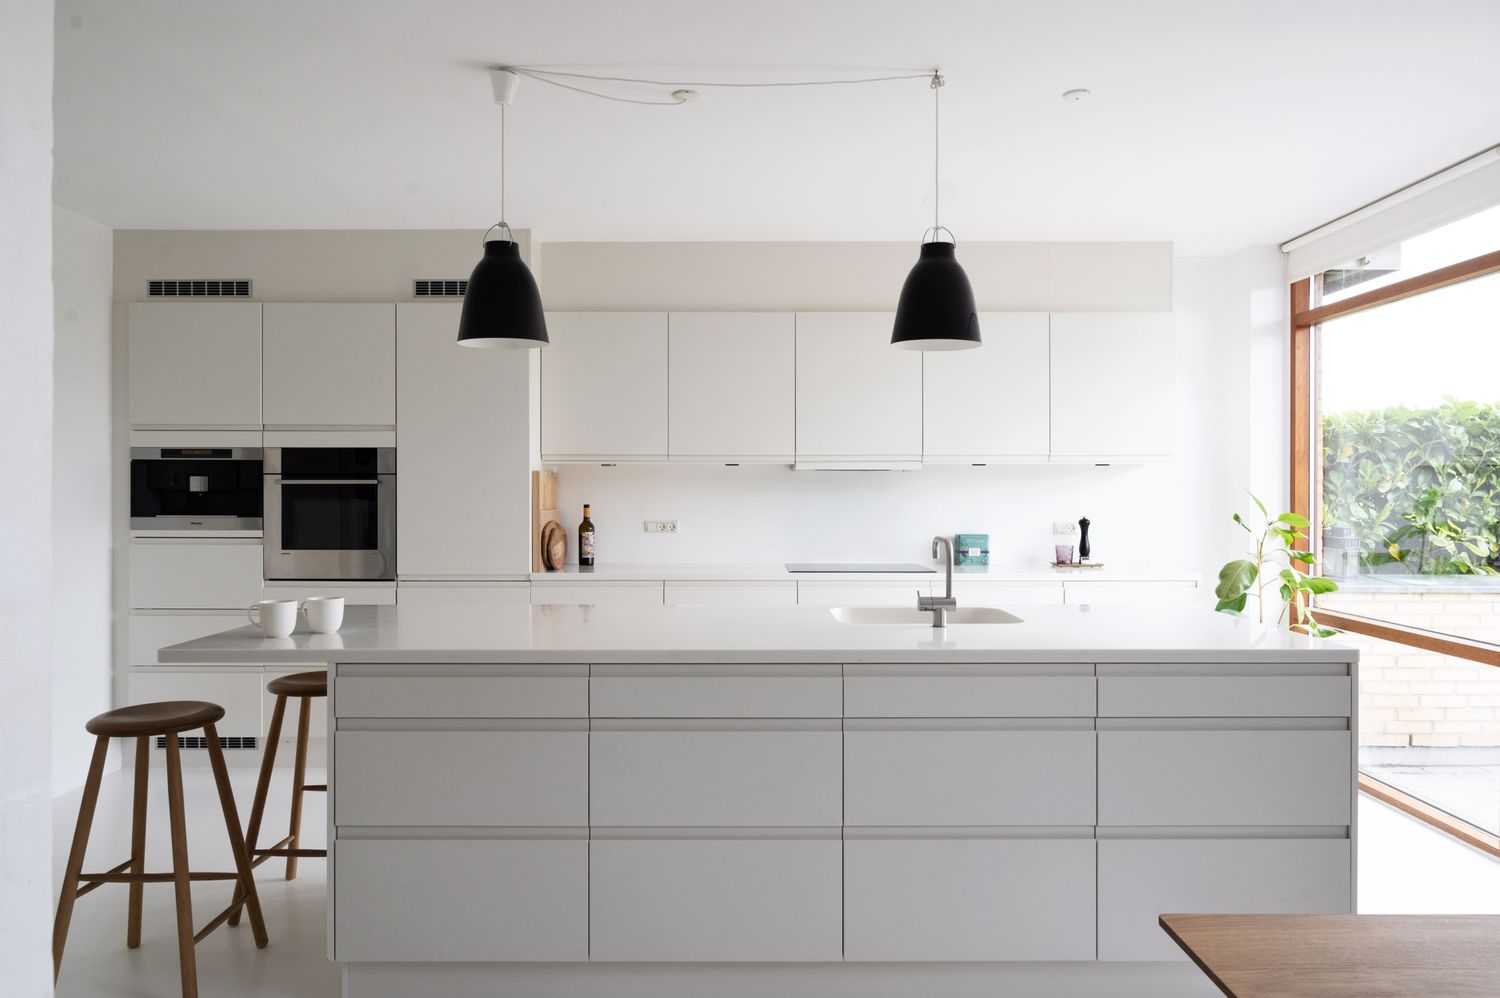 How to Achieve the Nordic Look In Your Kitchen